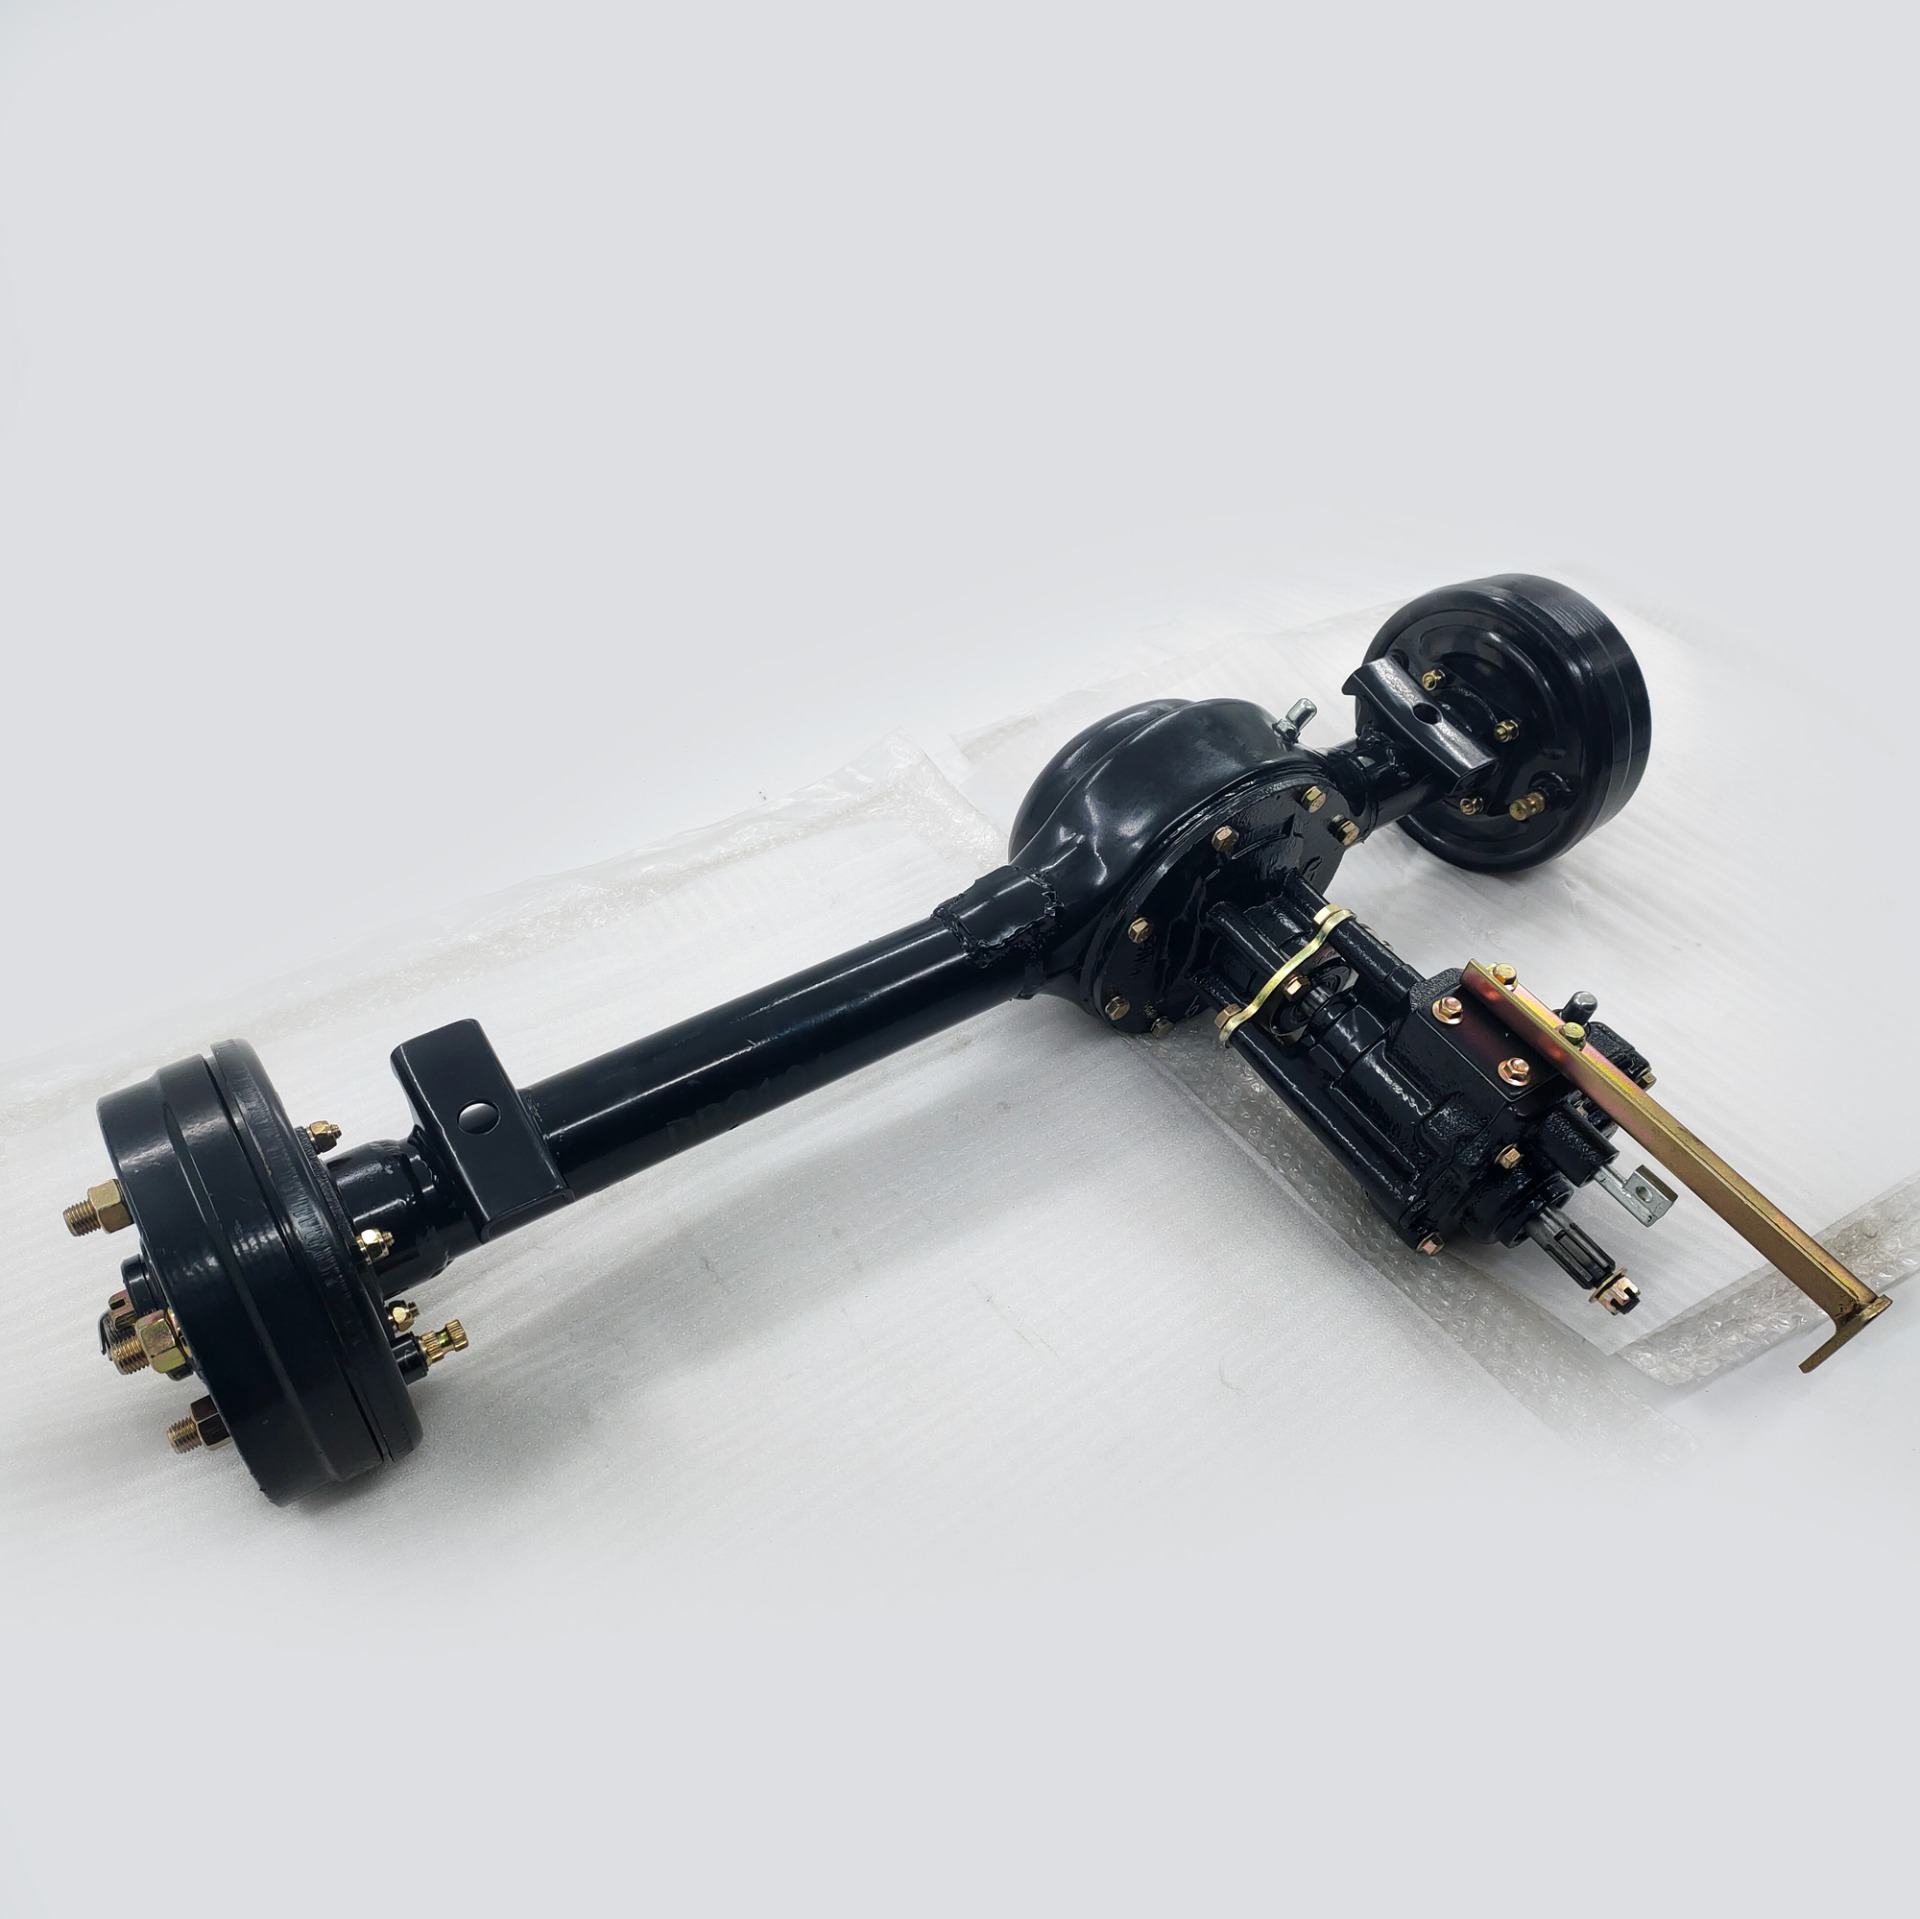 DAYANGtricycle spare parts  Five generations of small BOOSTER and lightweight 180-drum tapered rear axle